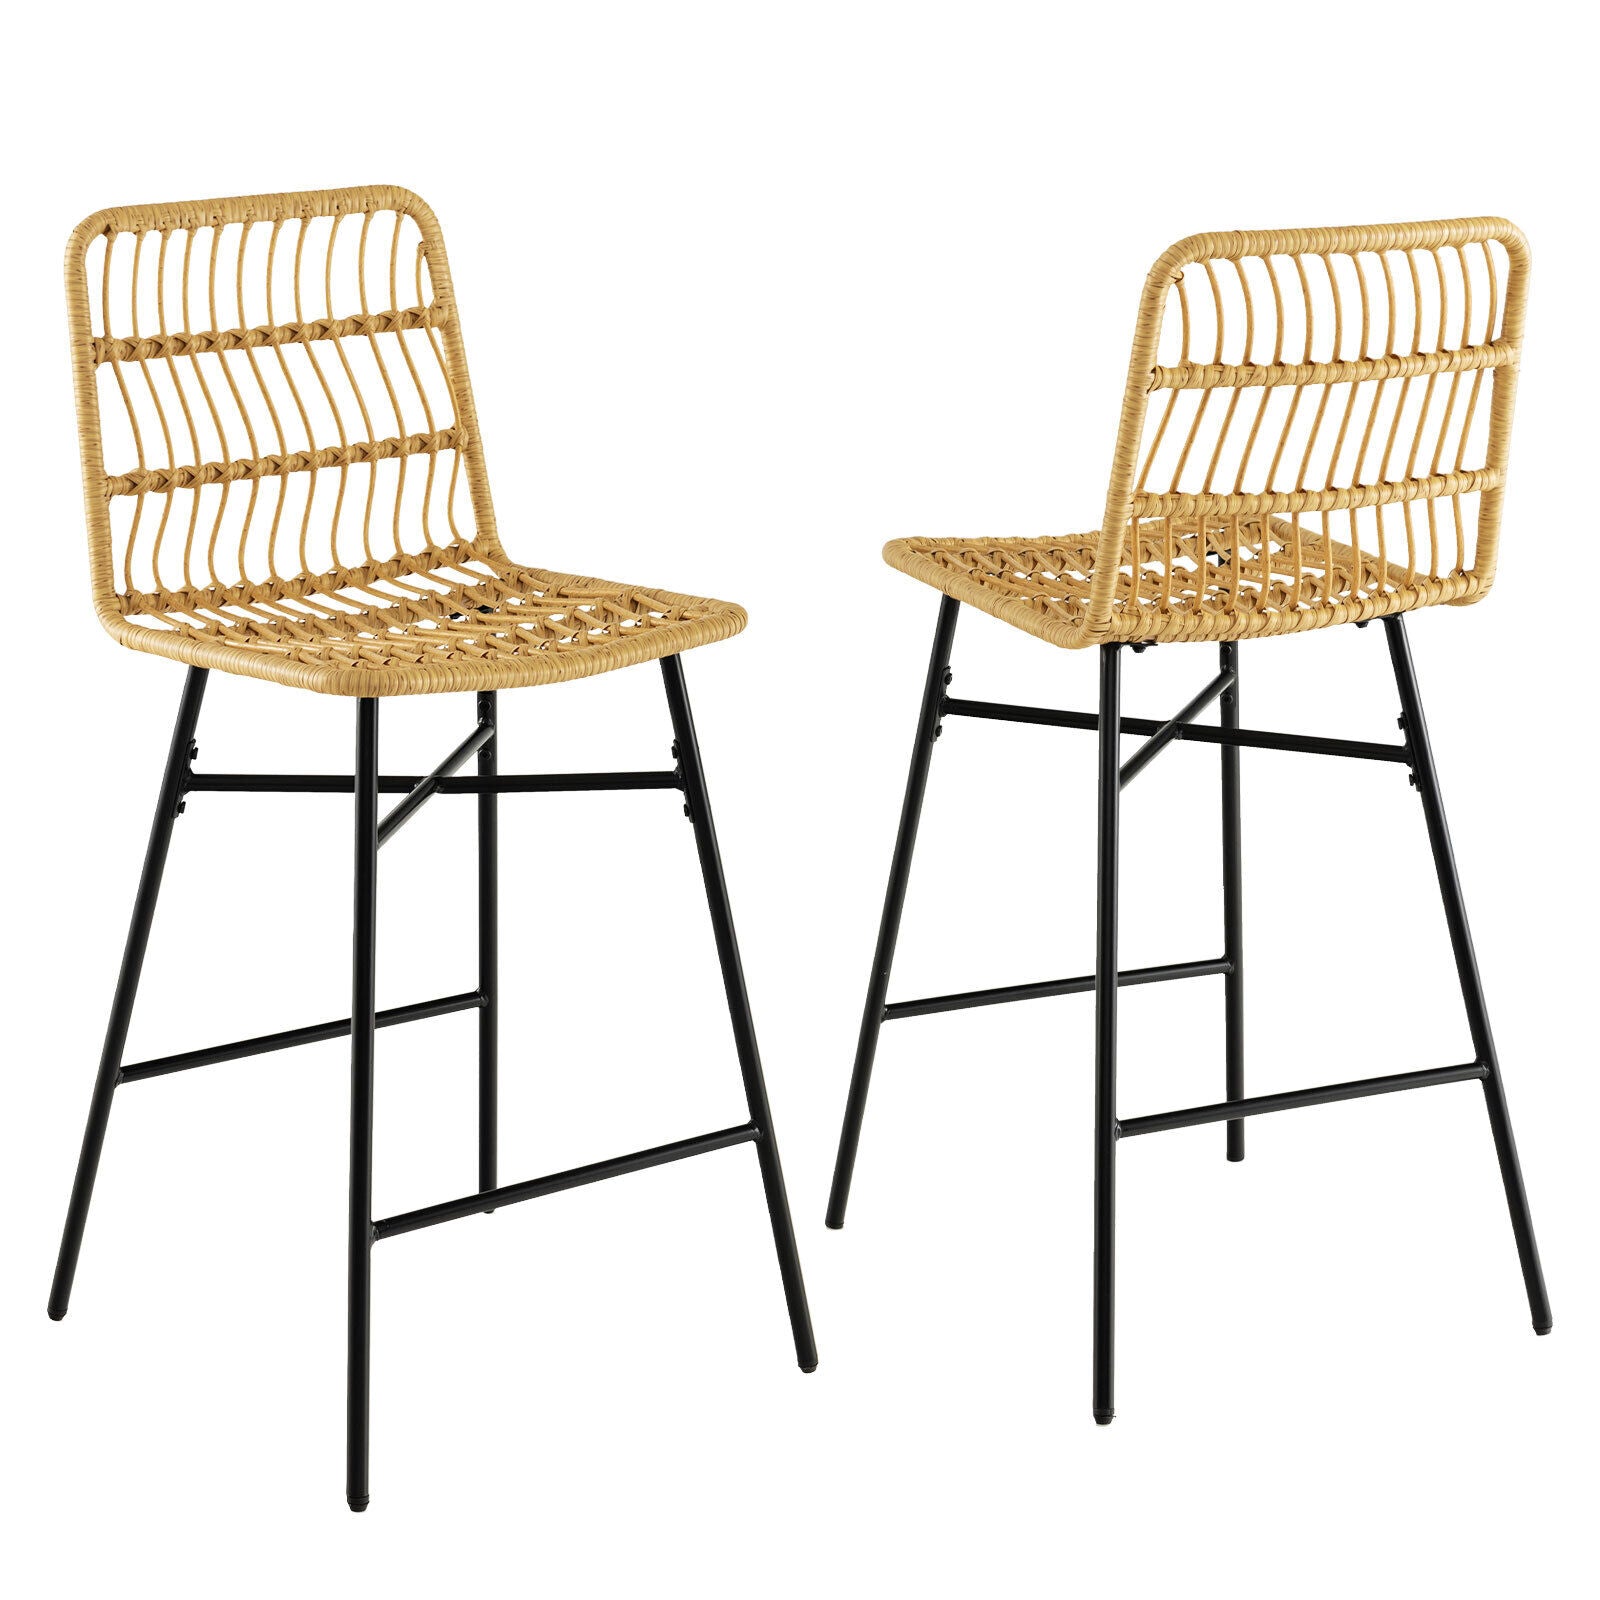 Set of 2 Rattan Bar Stools Counter Height Dining Chairs Natural